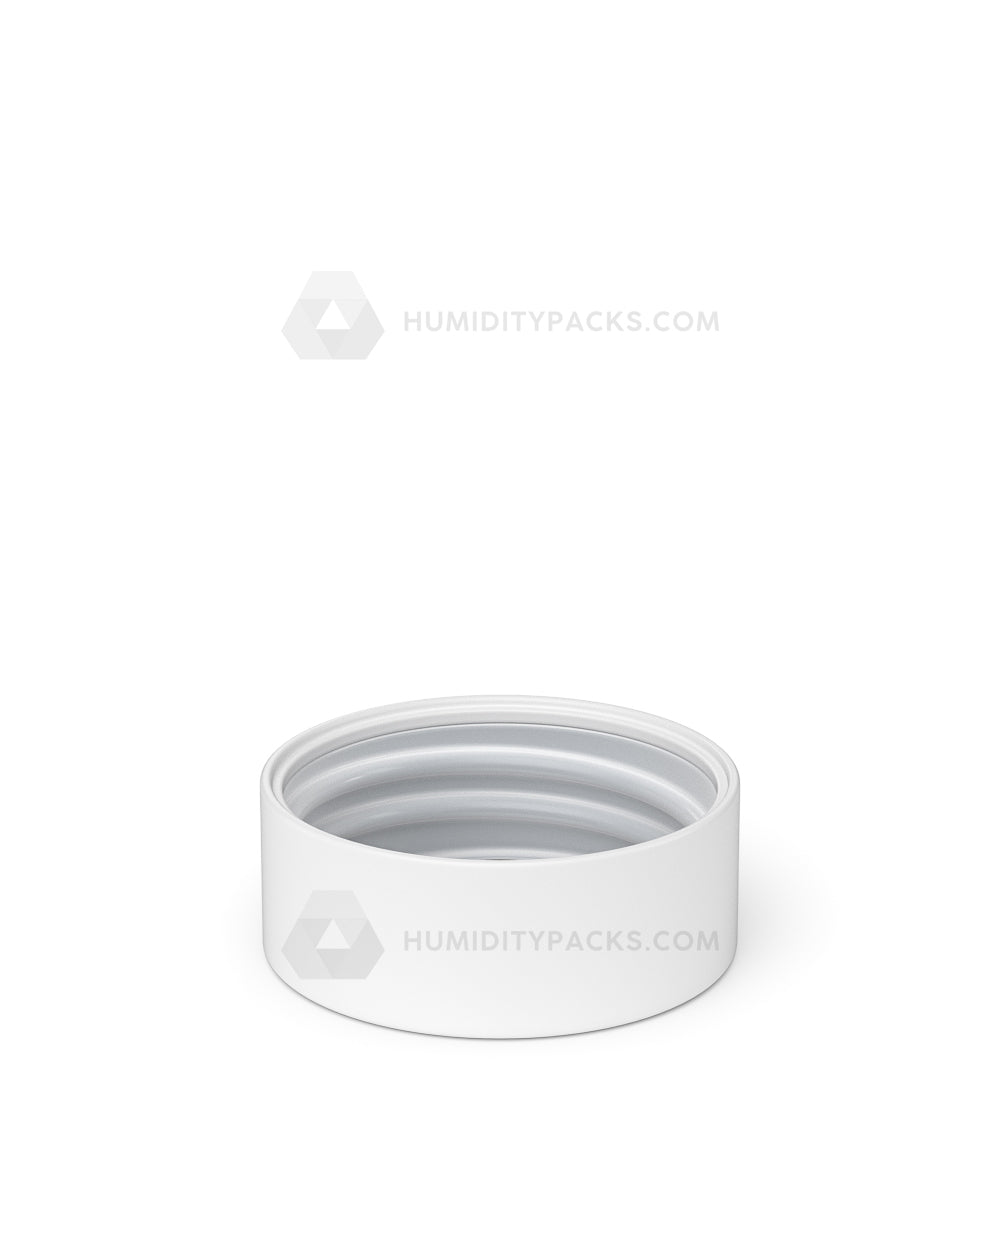 38mm Smooth Push and Turn Child Resistant Plastic Caps With Foil & Heat Liner - White - 320/Box Humidity Packs - 4